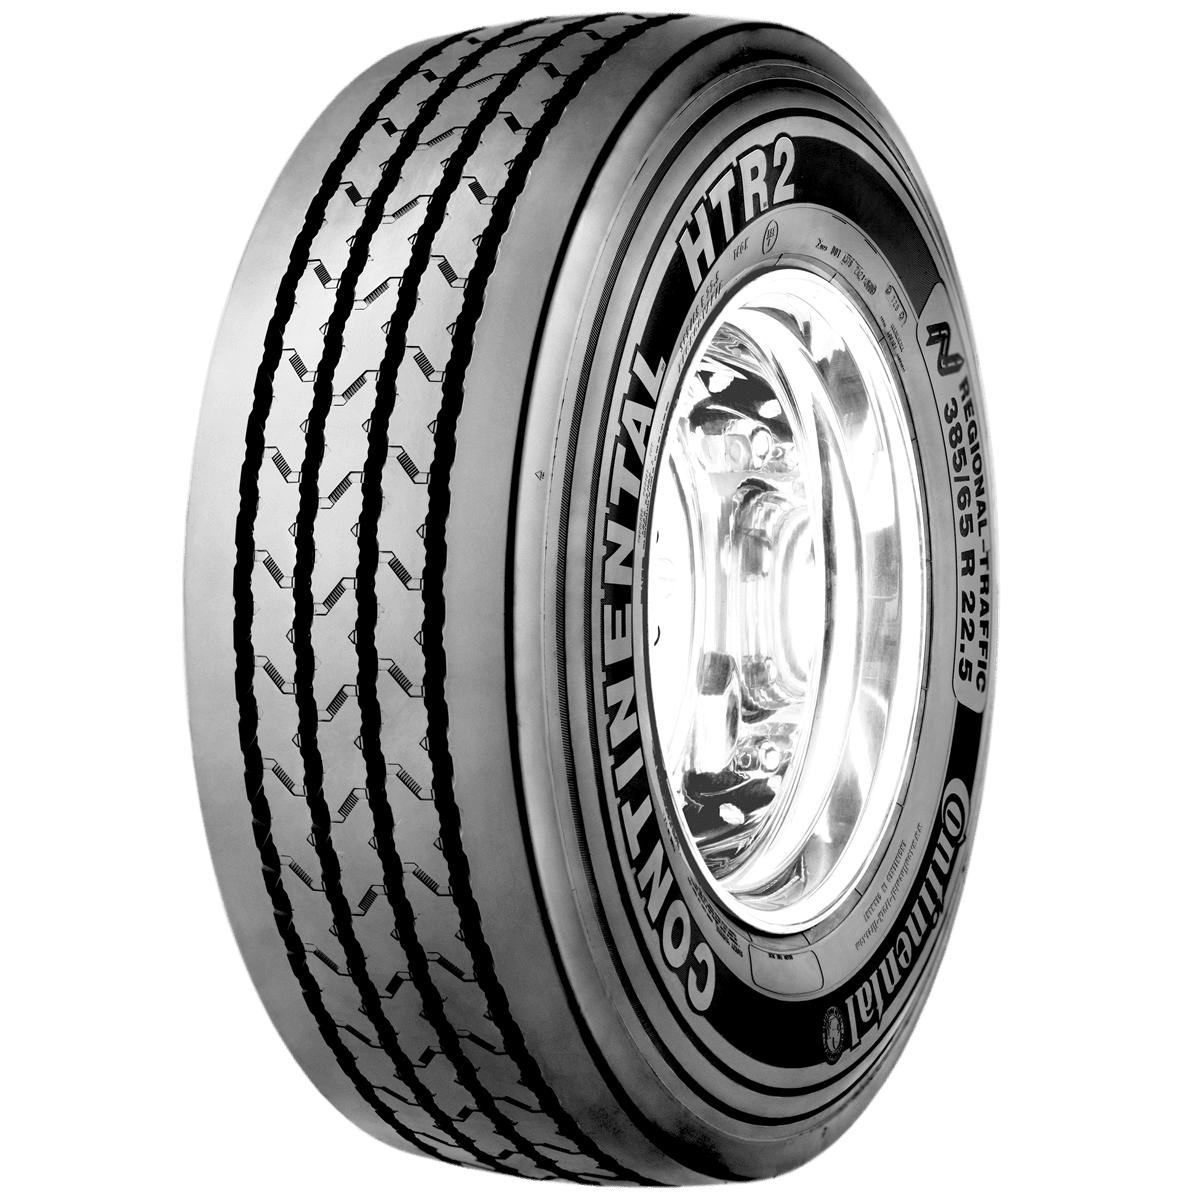 CONTINENTAL HTR2 425/65R22.5 All-position Trailer Tires